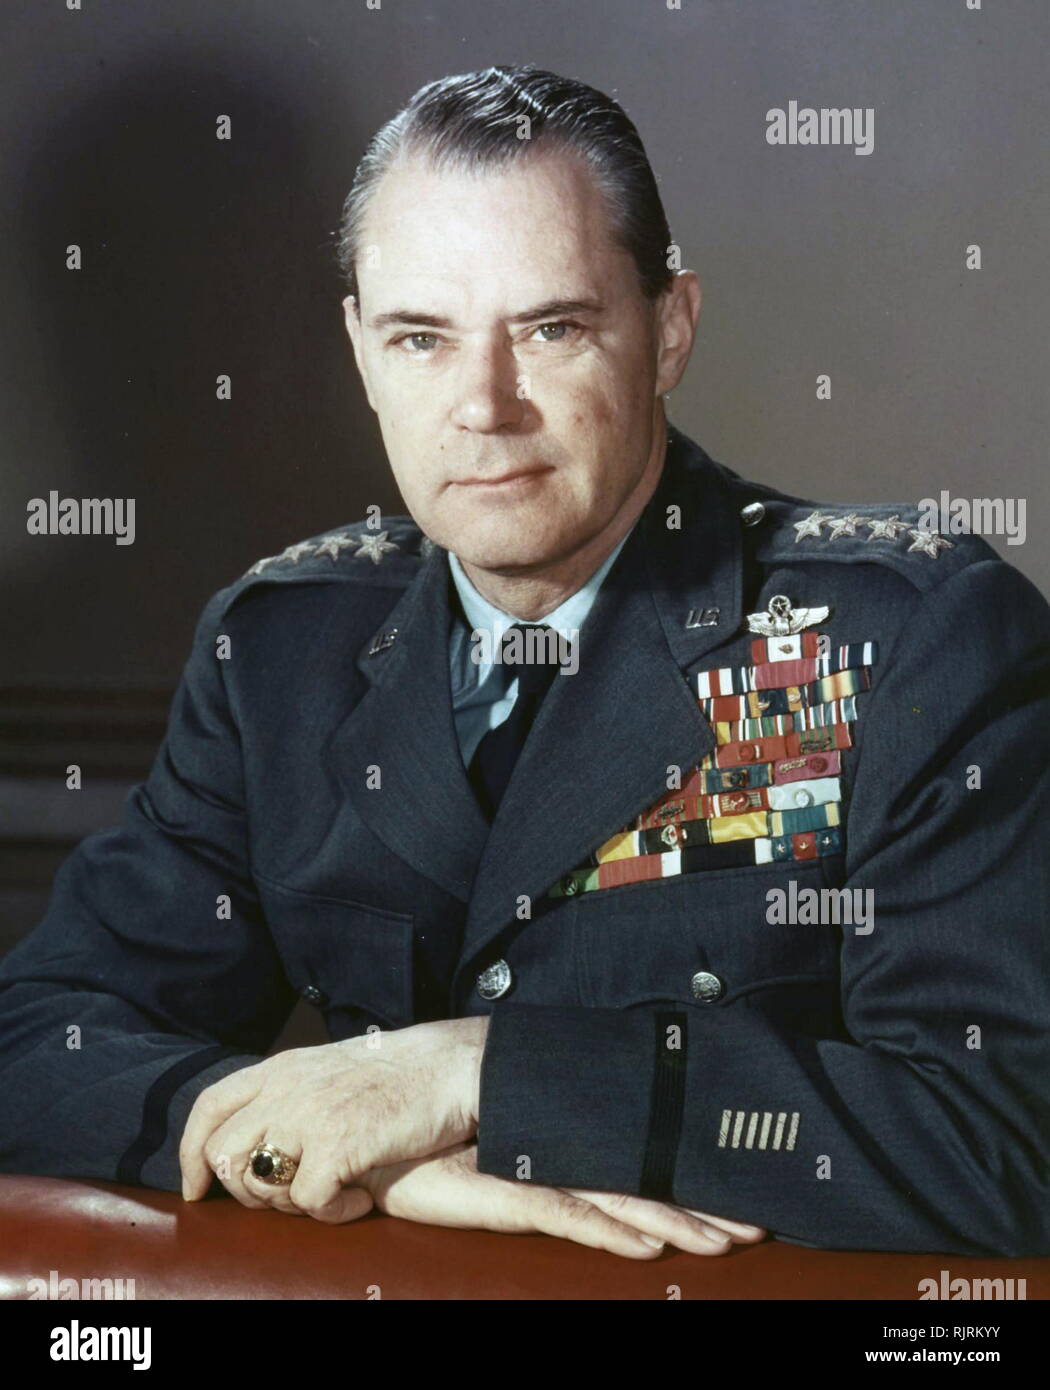 Hoyt Sanford Vandenberg (1899 - 1954); United States Air Force general. He served as the second Chief of Staff of the Air Force, and the second Director of Central Intelligence. In 1946, he was briefly the U.S. Chief of Military Intelligence. Hoyt Sanford Vandenberg (1899 - 1954); United States Air Force general. Stock Photo